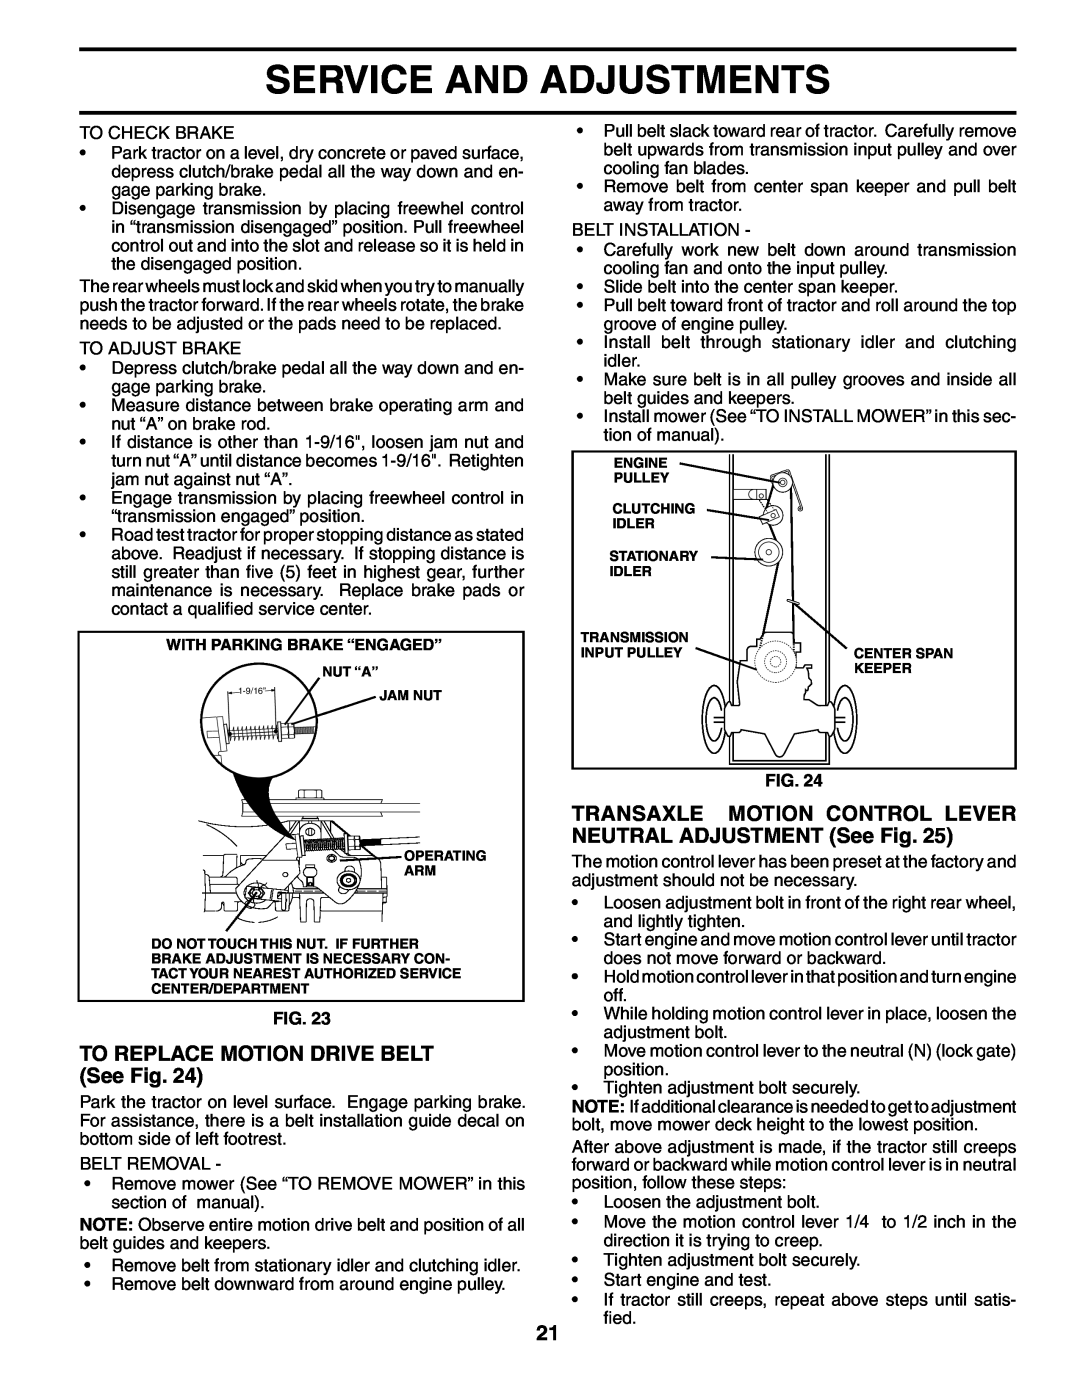 Poulan 184523, 954569561 TO REPLACE MOTION DRIVE BELT See Fig, TRANSAXLE MOTION CONTROL LEVER NEUTRAL ADJUSTMENT See Fig 